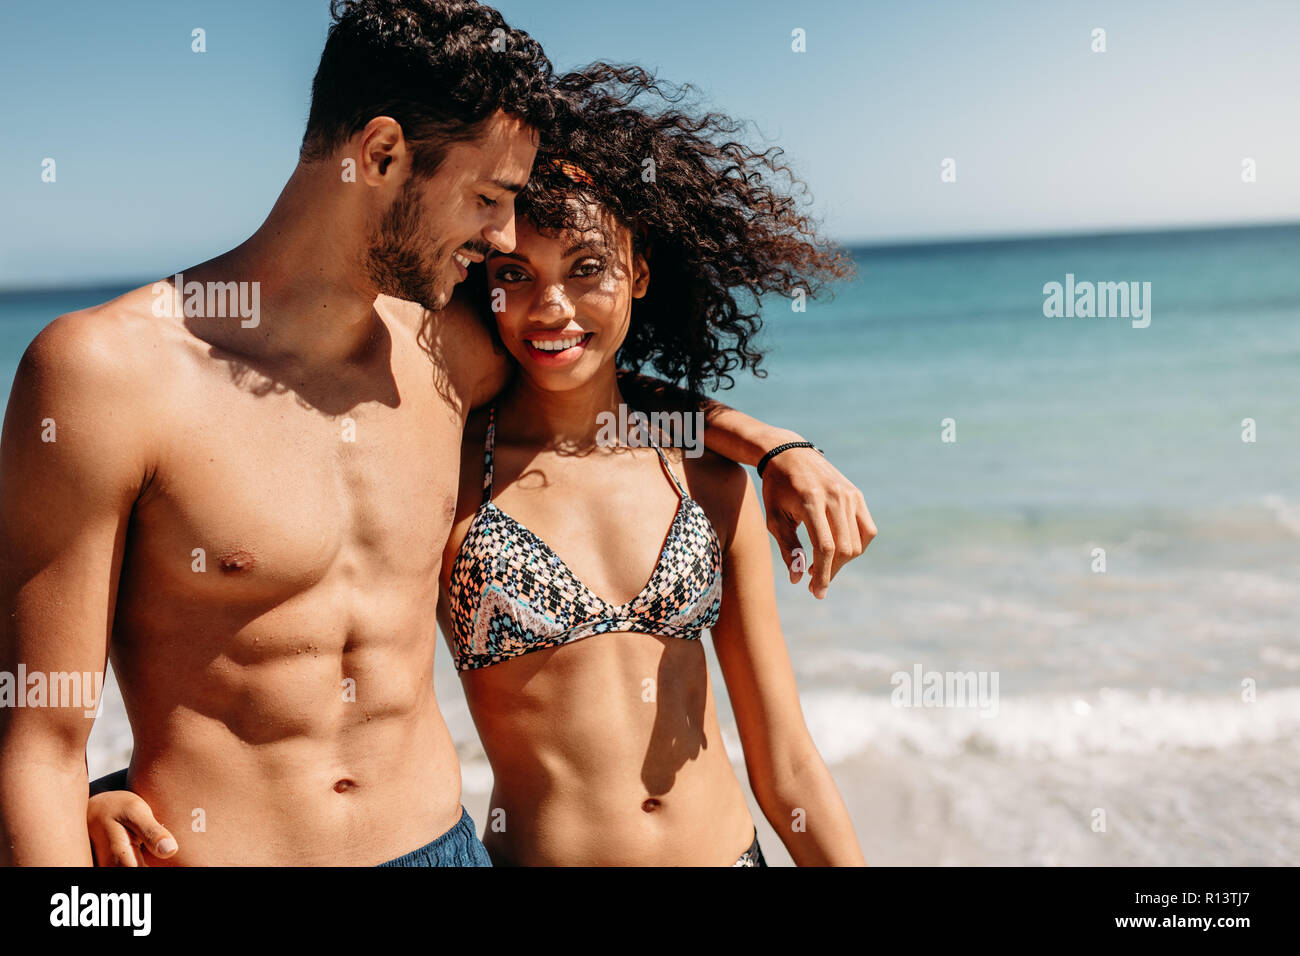 Romantic couple walking on beach together on a sunny day. Smiling man walking on beach with girlfriend putting his arm around her shoulder. Stock Photo